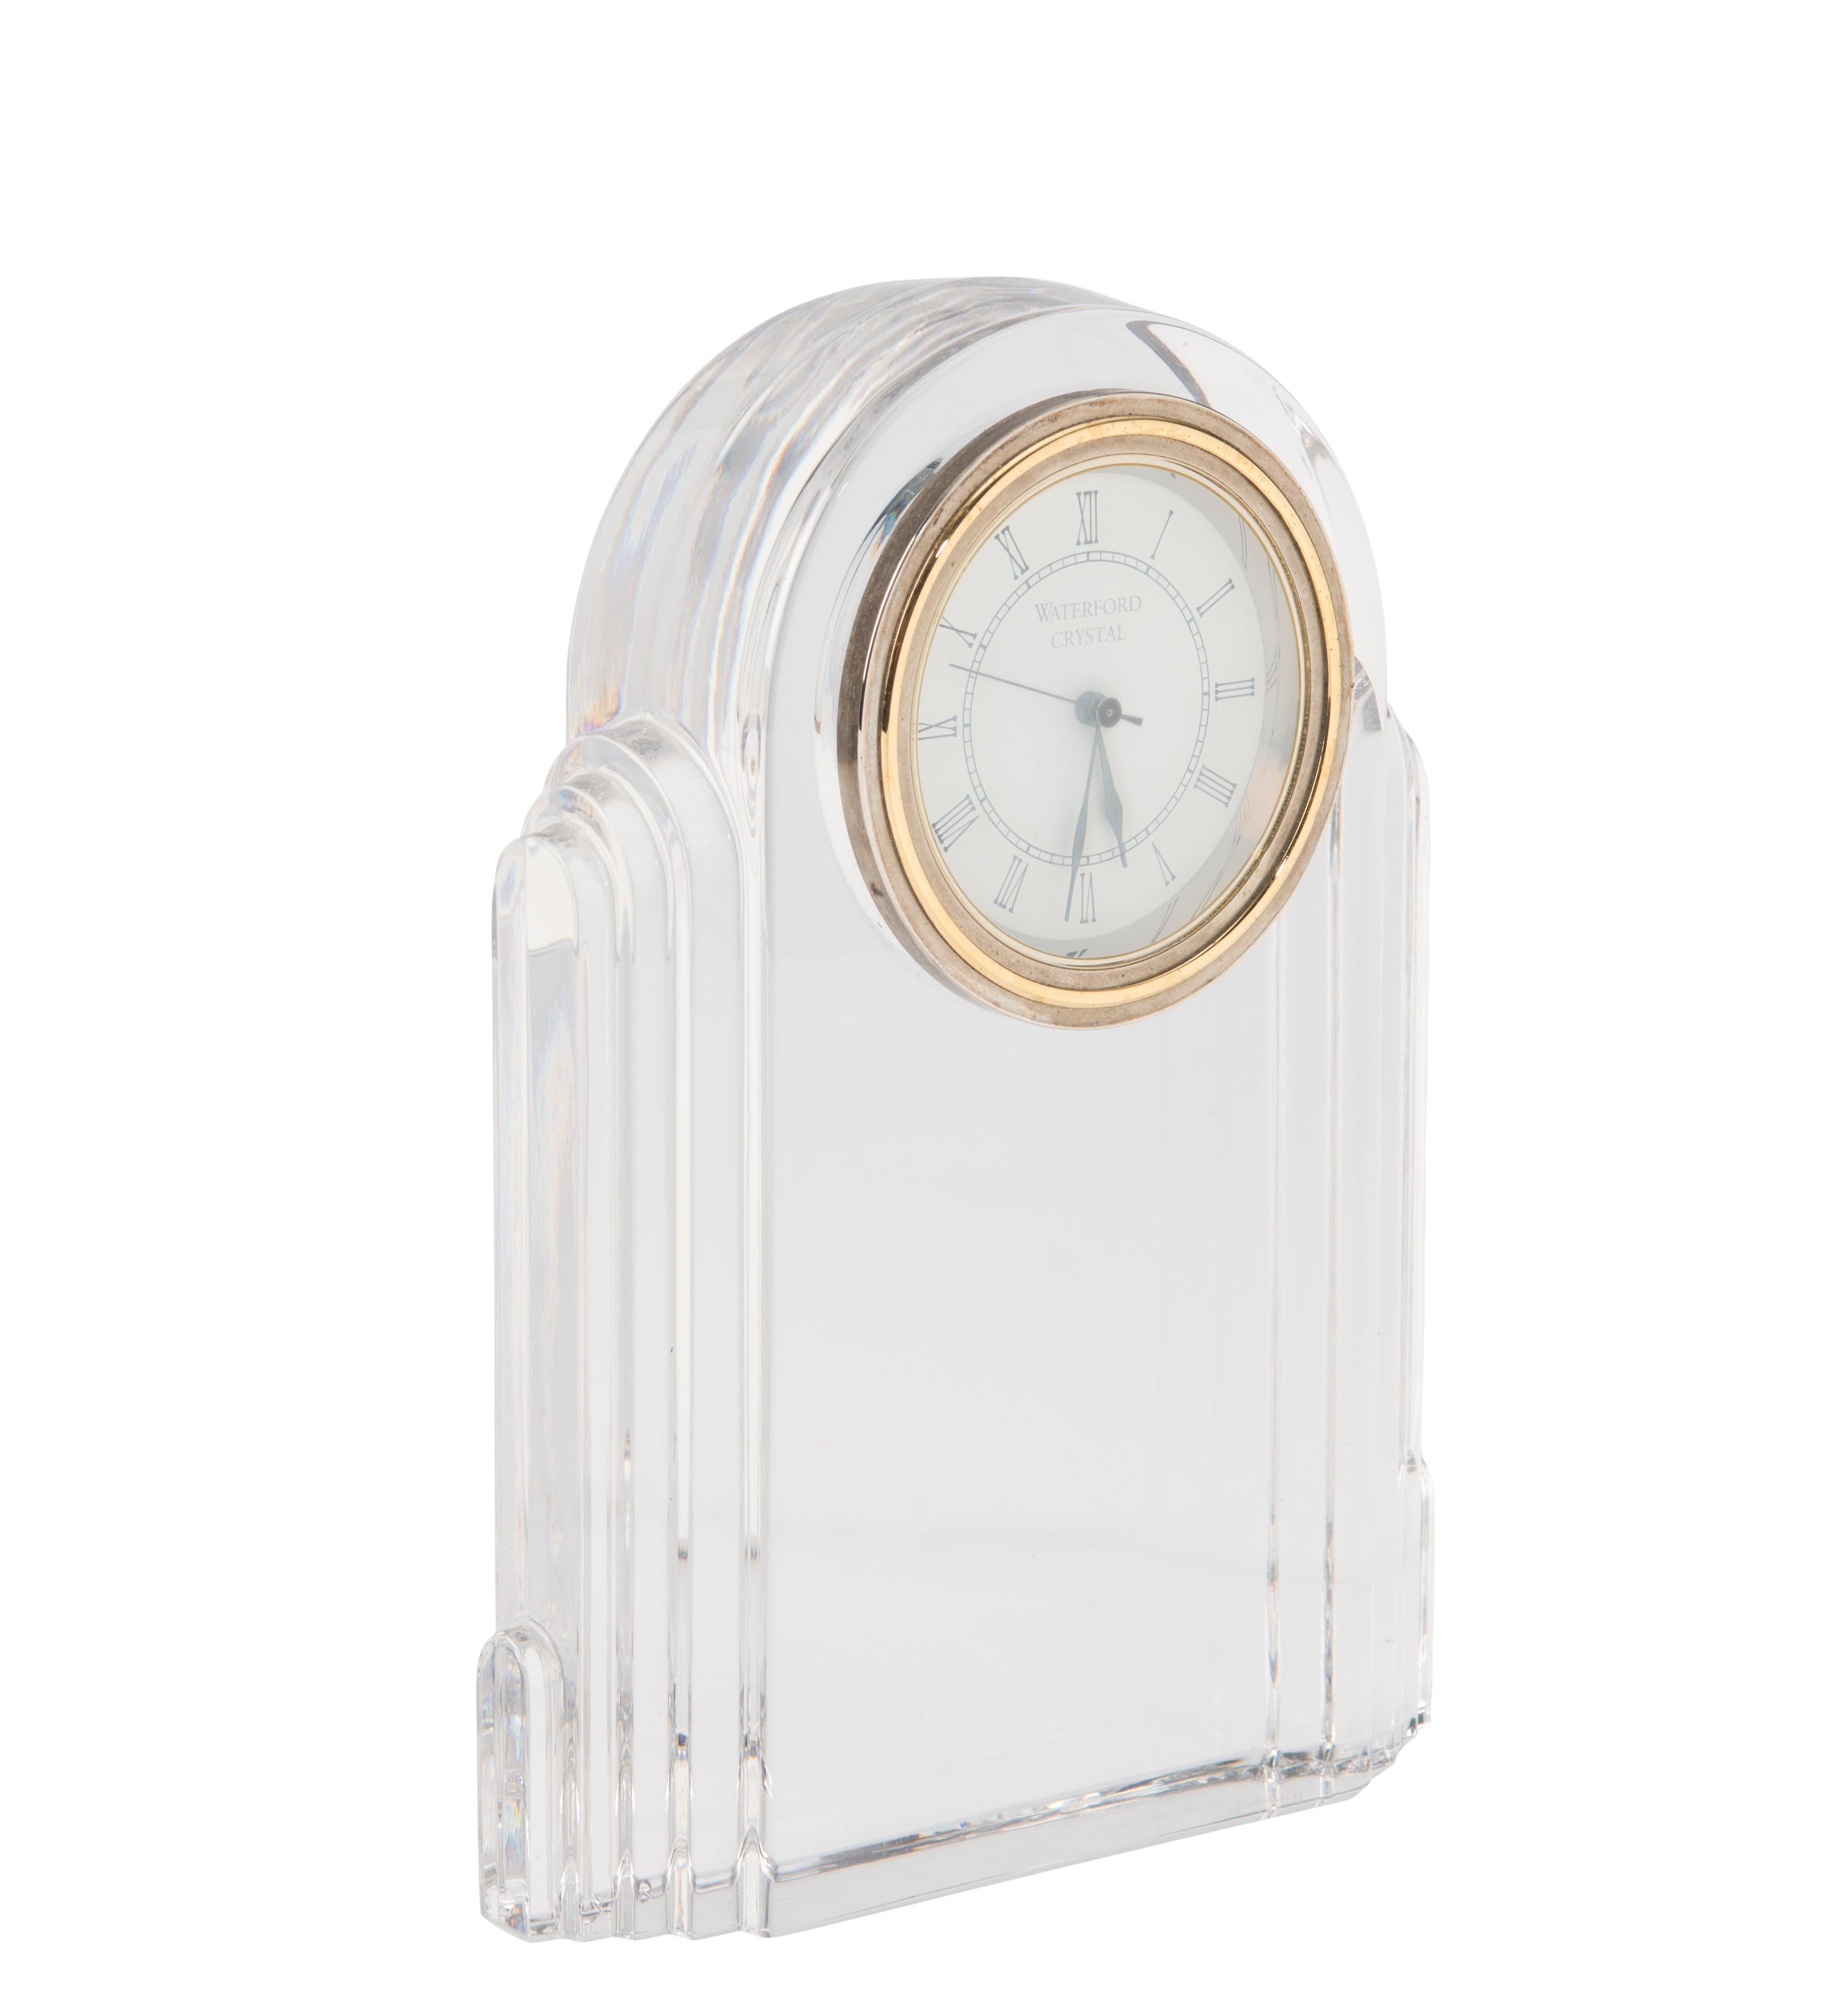 Classic deco desk clock in clear crystal by Waterford, 1999-2002. Desk clock has faceted sides and Roman numeral markers at clock centre.